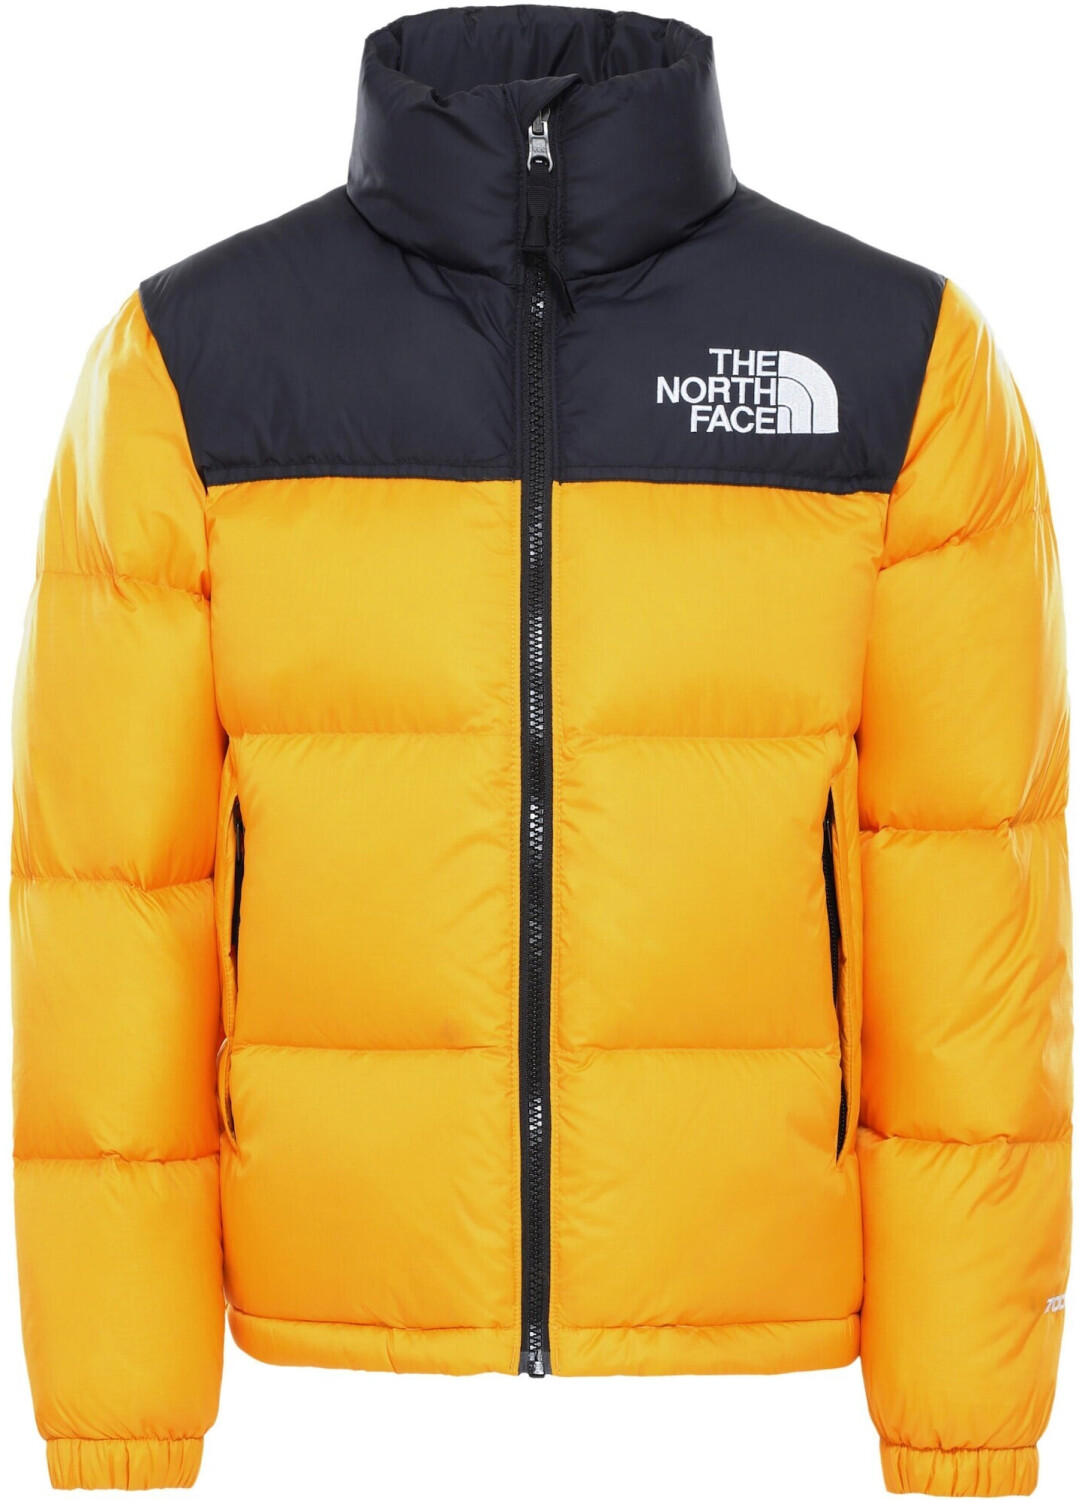 The North Face Youth 1996 Retro Nuptse Jacket summit gold au meilleur